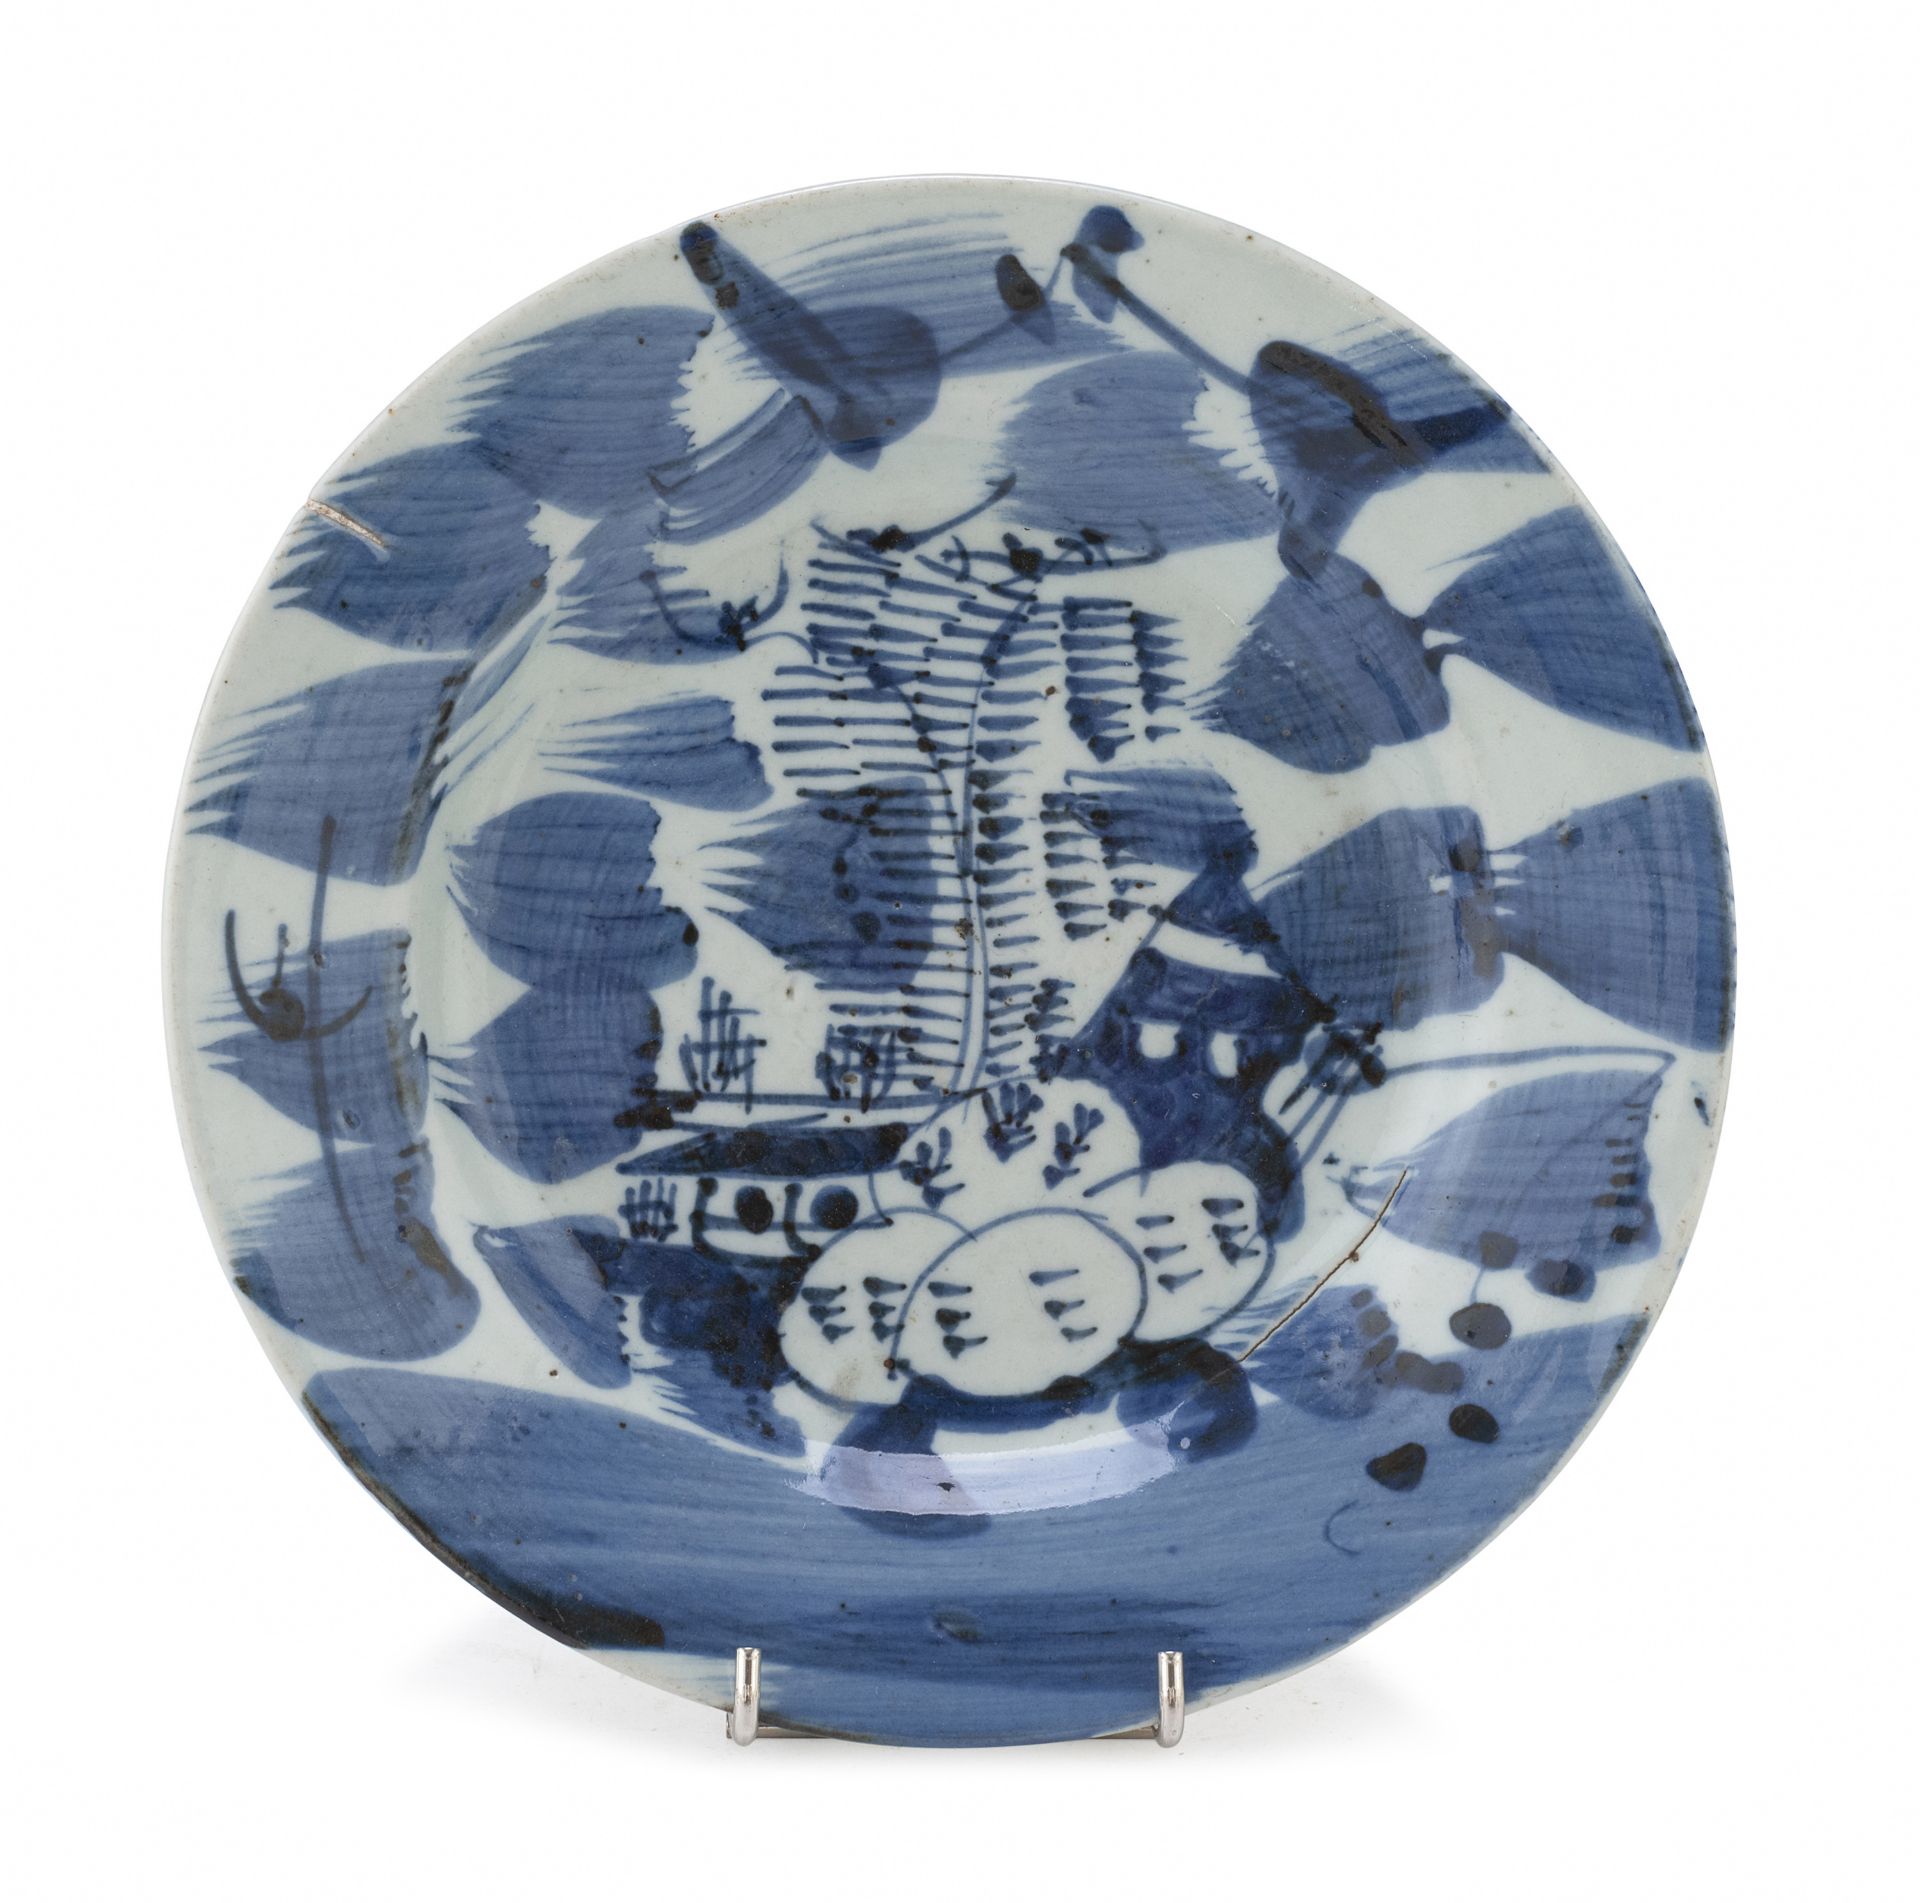 A CHINESE WHITE AND BLUE PORCELAIN DISH 19TH CENTURY.